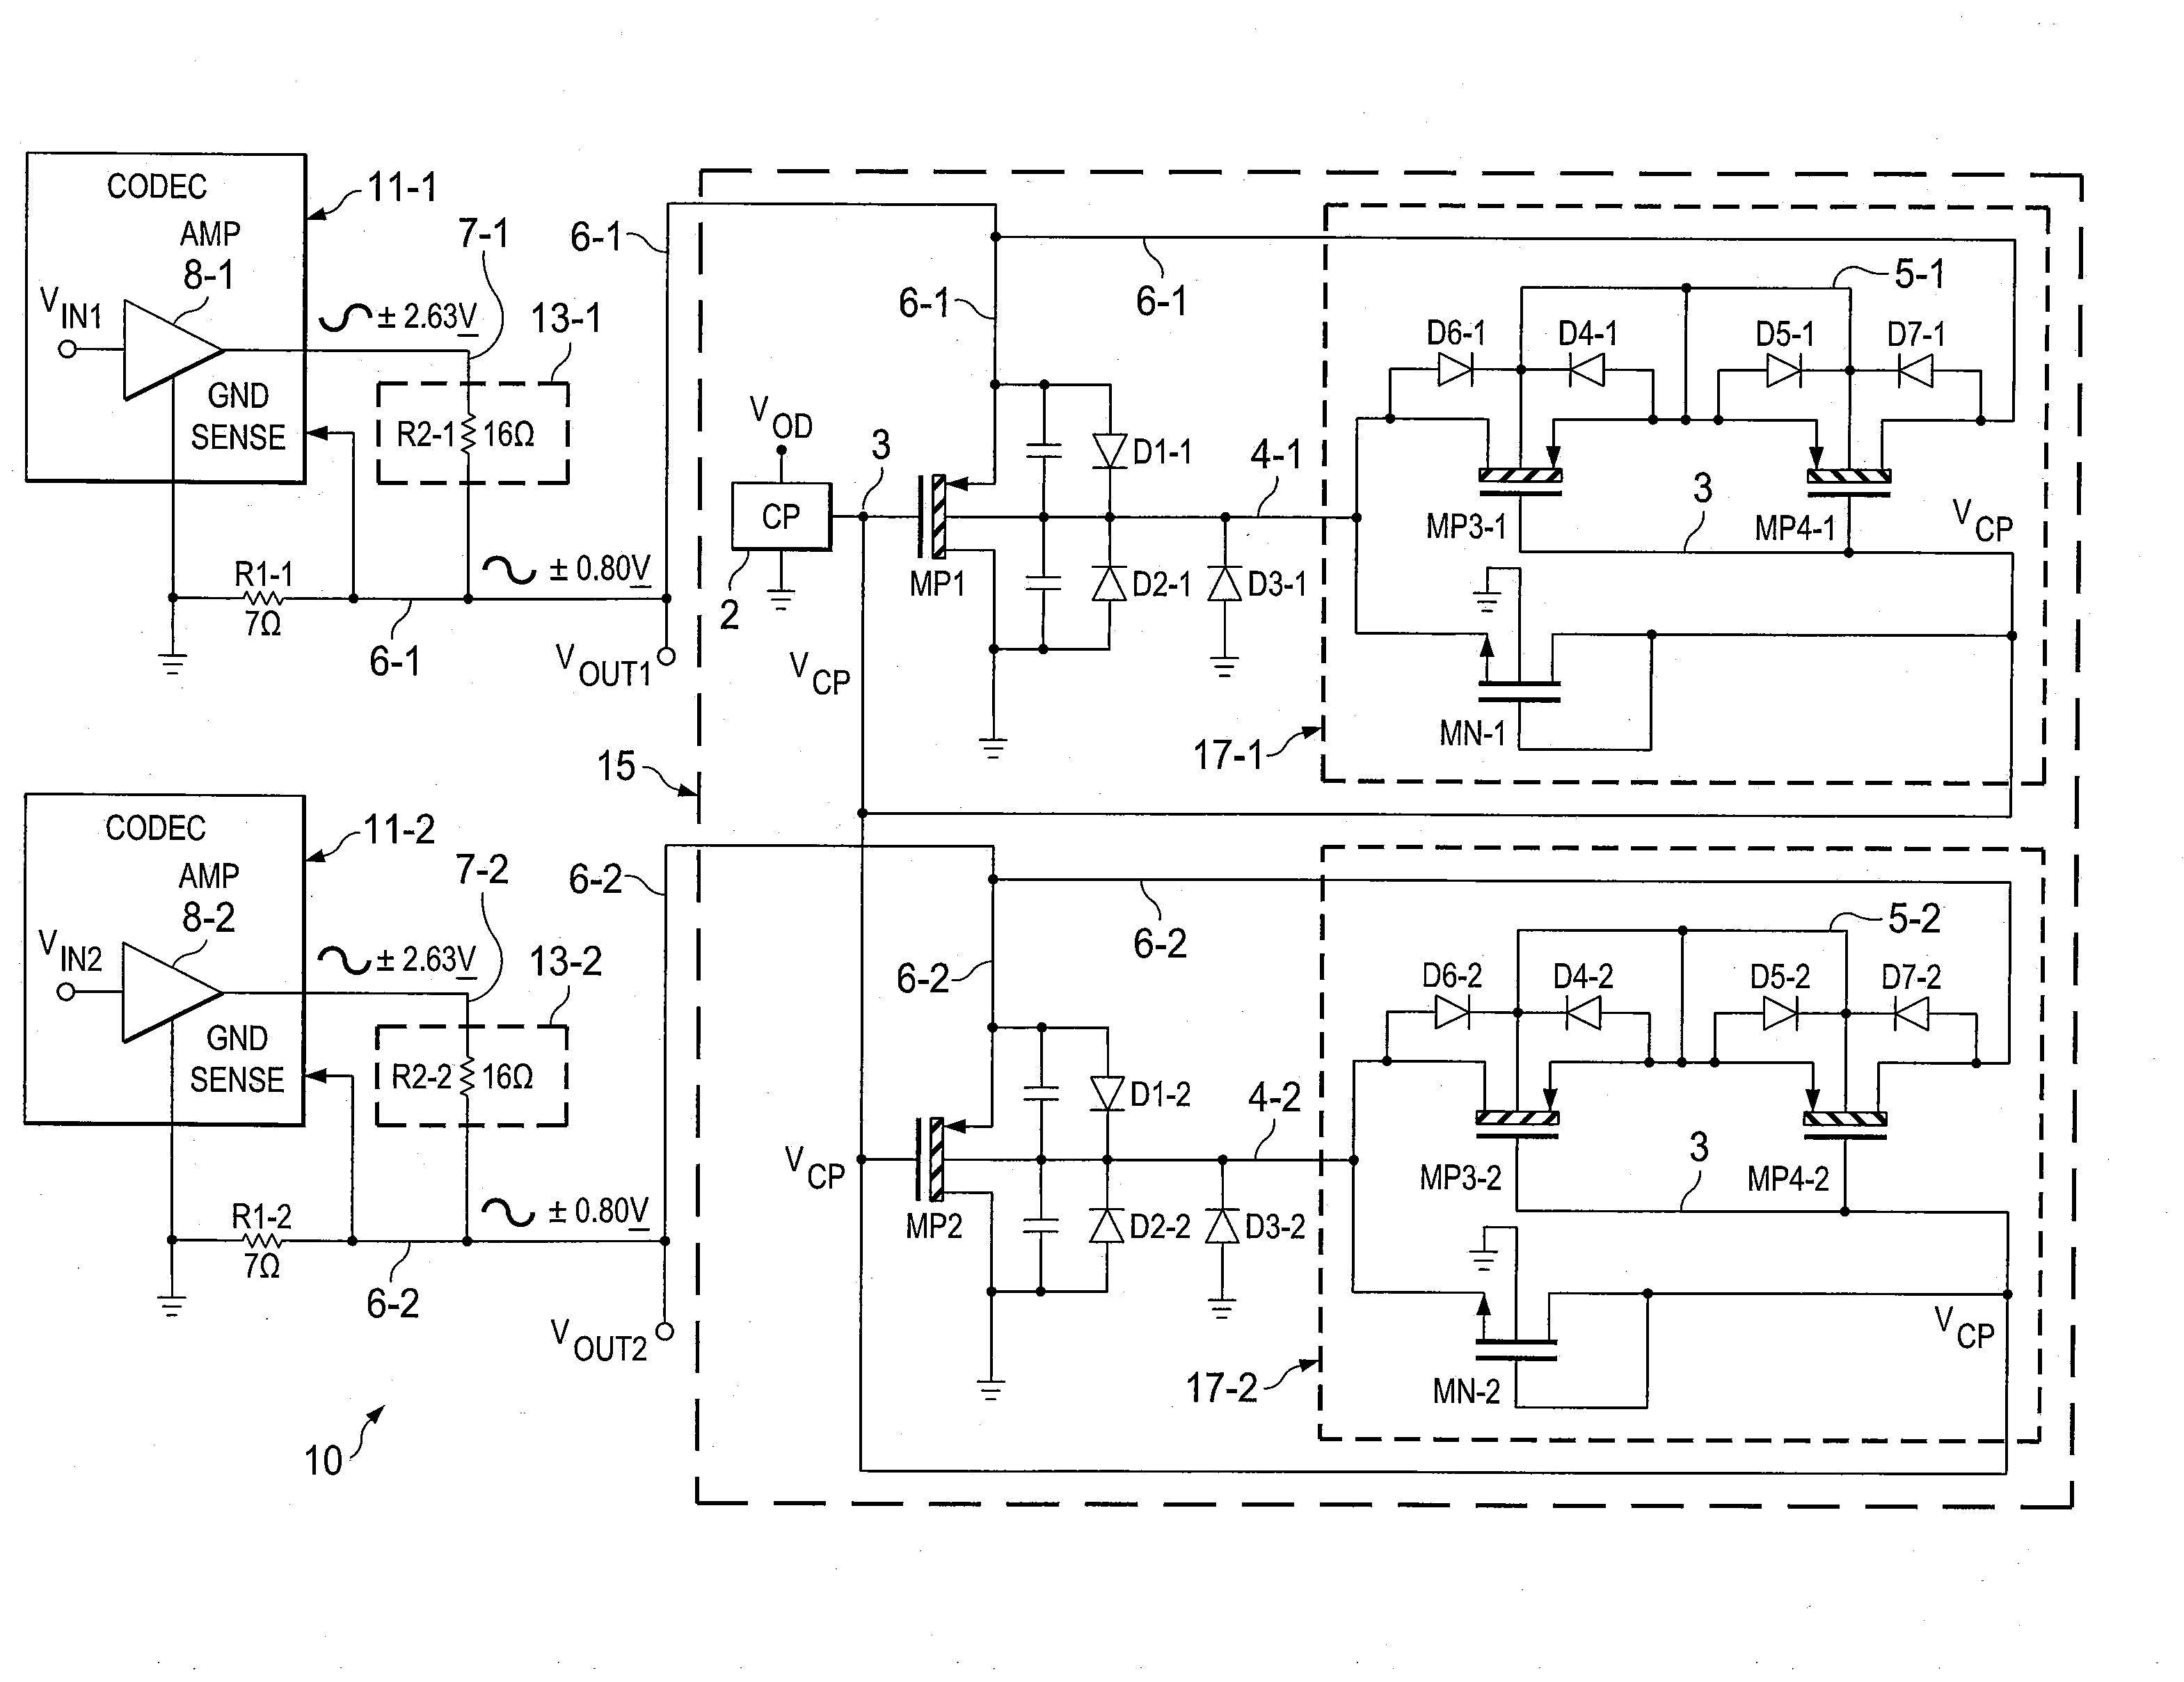 Negative Audio Signal Voltage Protection Circuit and Method for Audio Ground Circuits